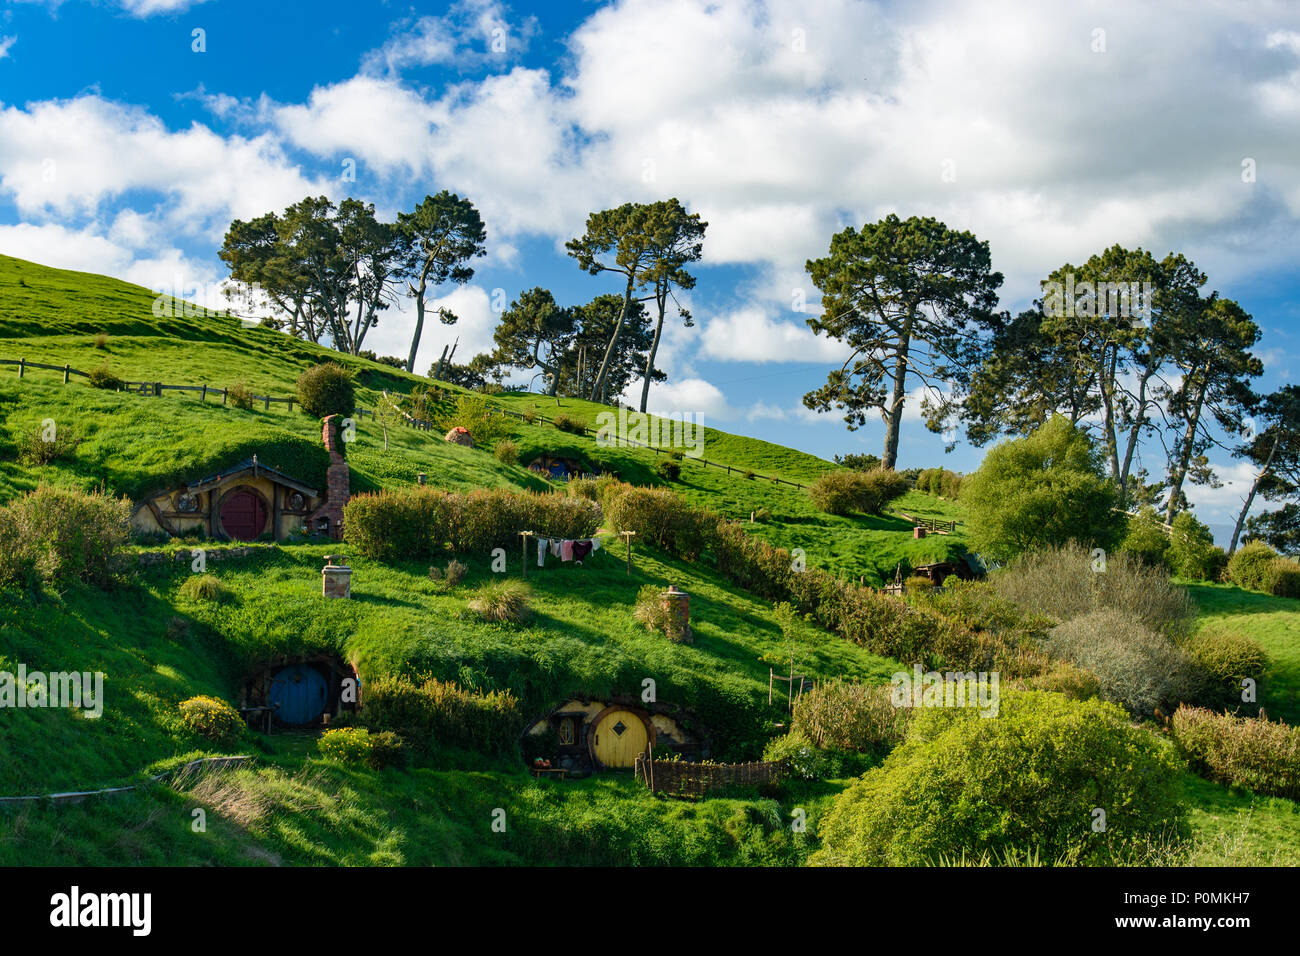 Hobbiton Movie Set of Shire in The Lord of the Rings and The Hobbit trilogies, Matamata, New Zealand Stock Photo